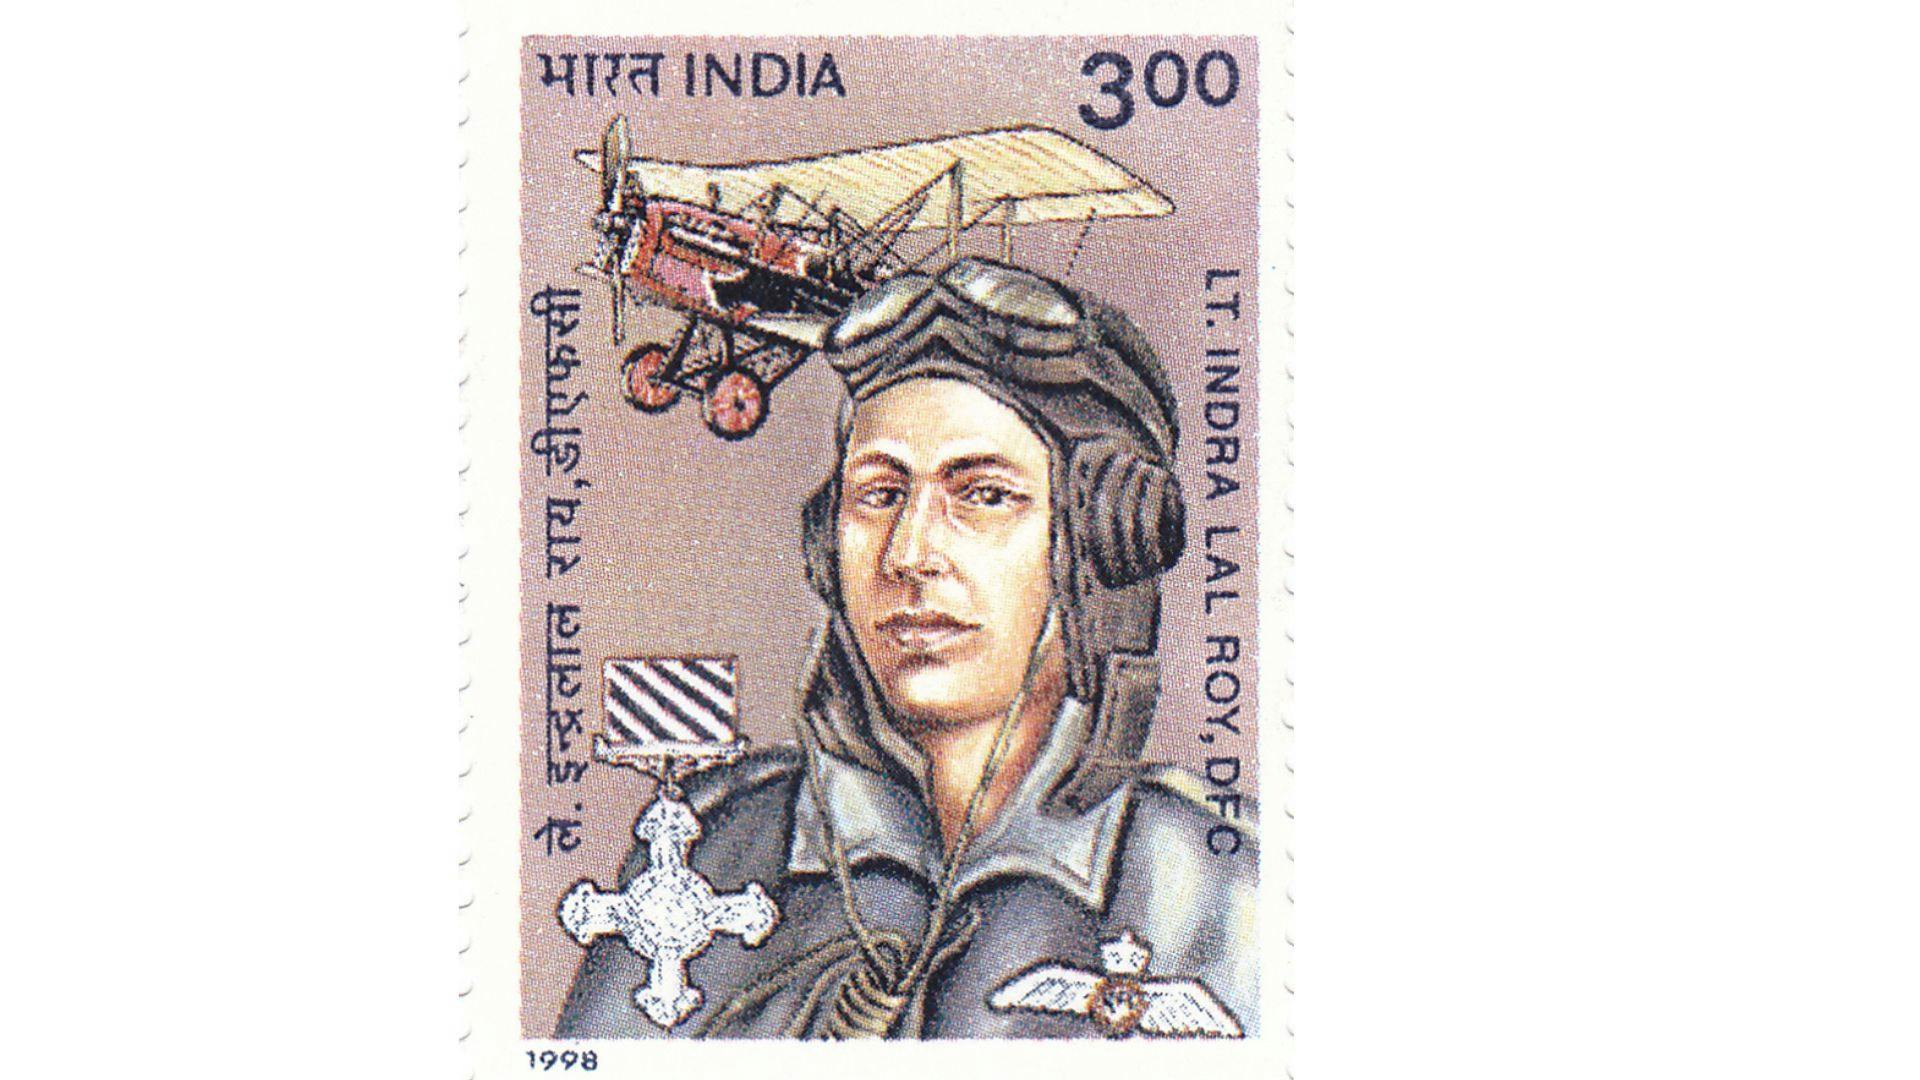 A 1998 Stamp commemorating Indra Lal Roy, issued by the Government of India